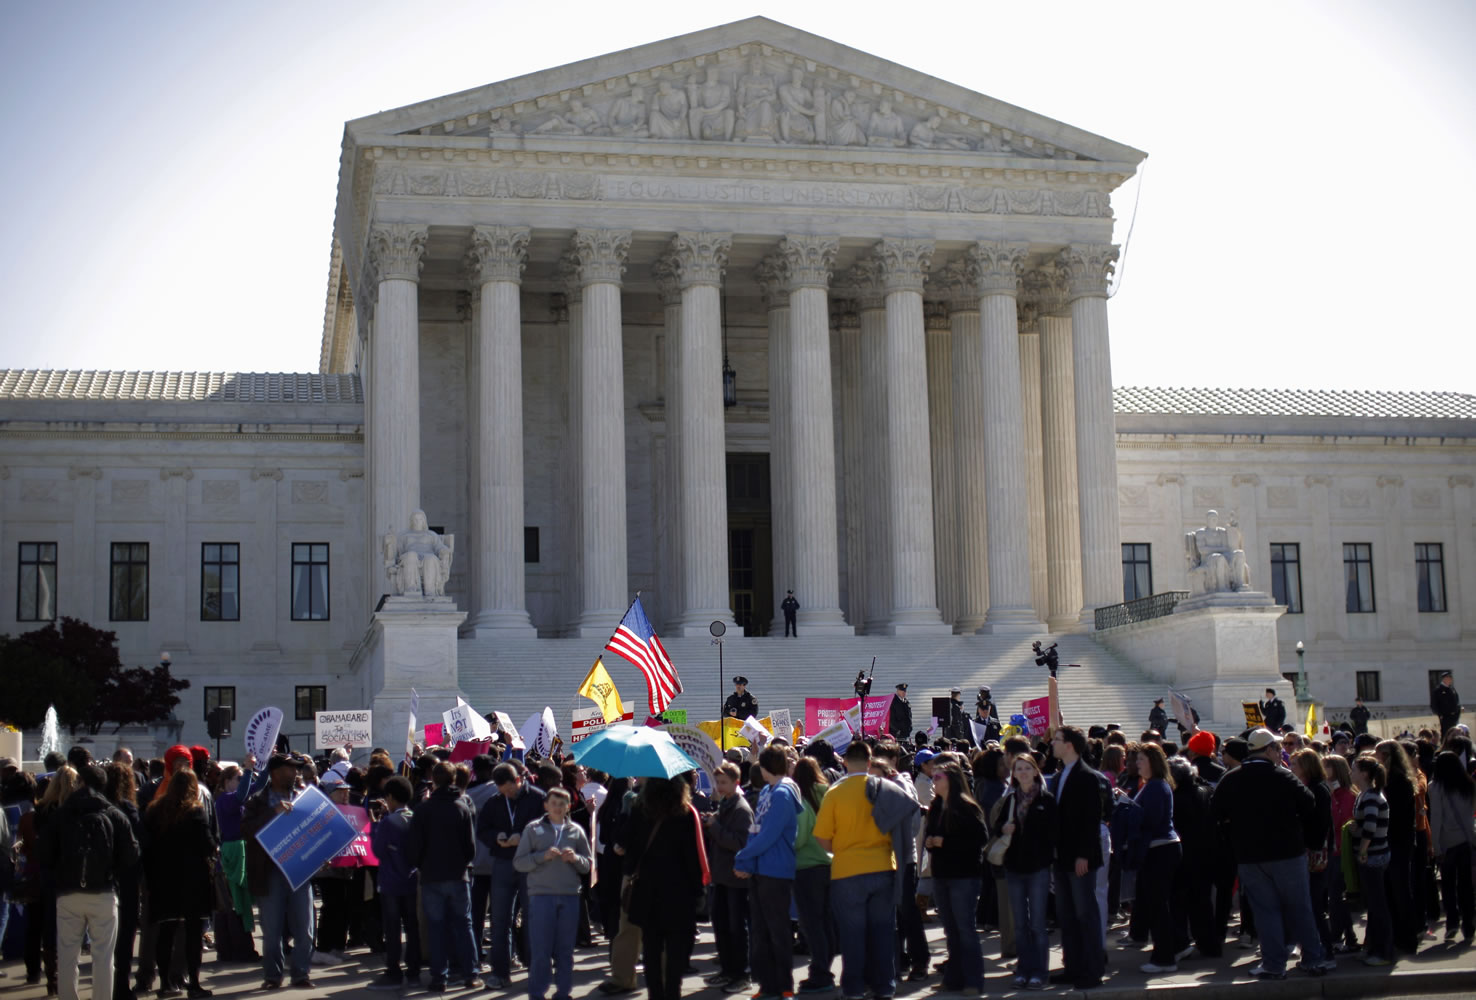 Supporters and opponents of health care reform rally in front of the Supreme Court in Washington on Tuesday as the court continued arguments on the health care law signed by President Barack Obama.